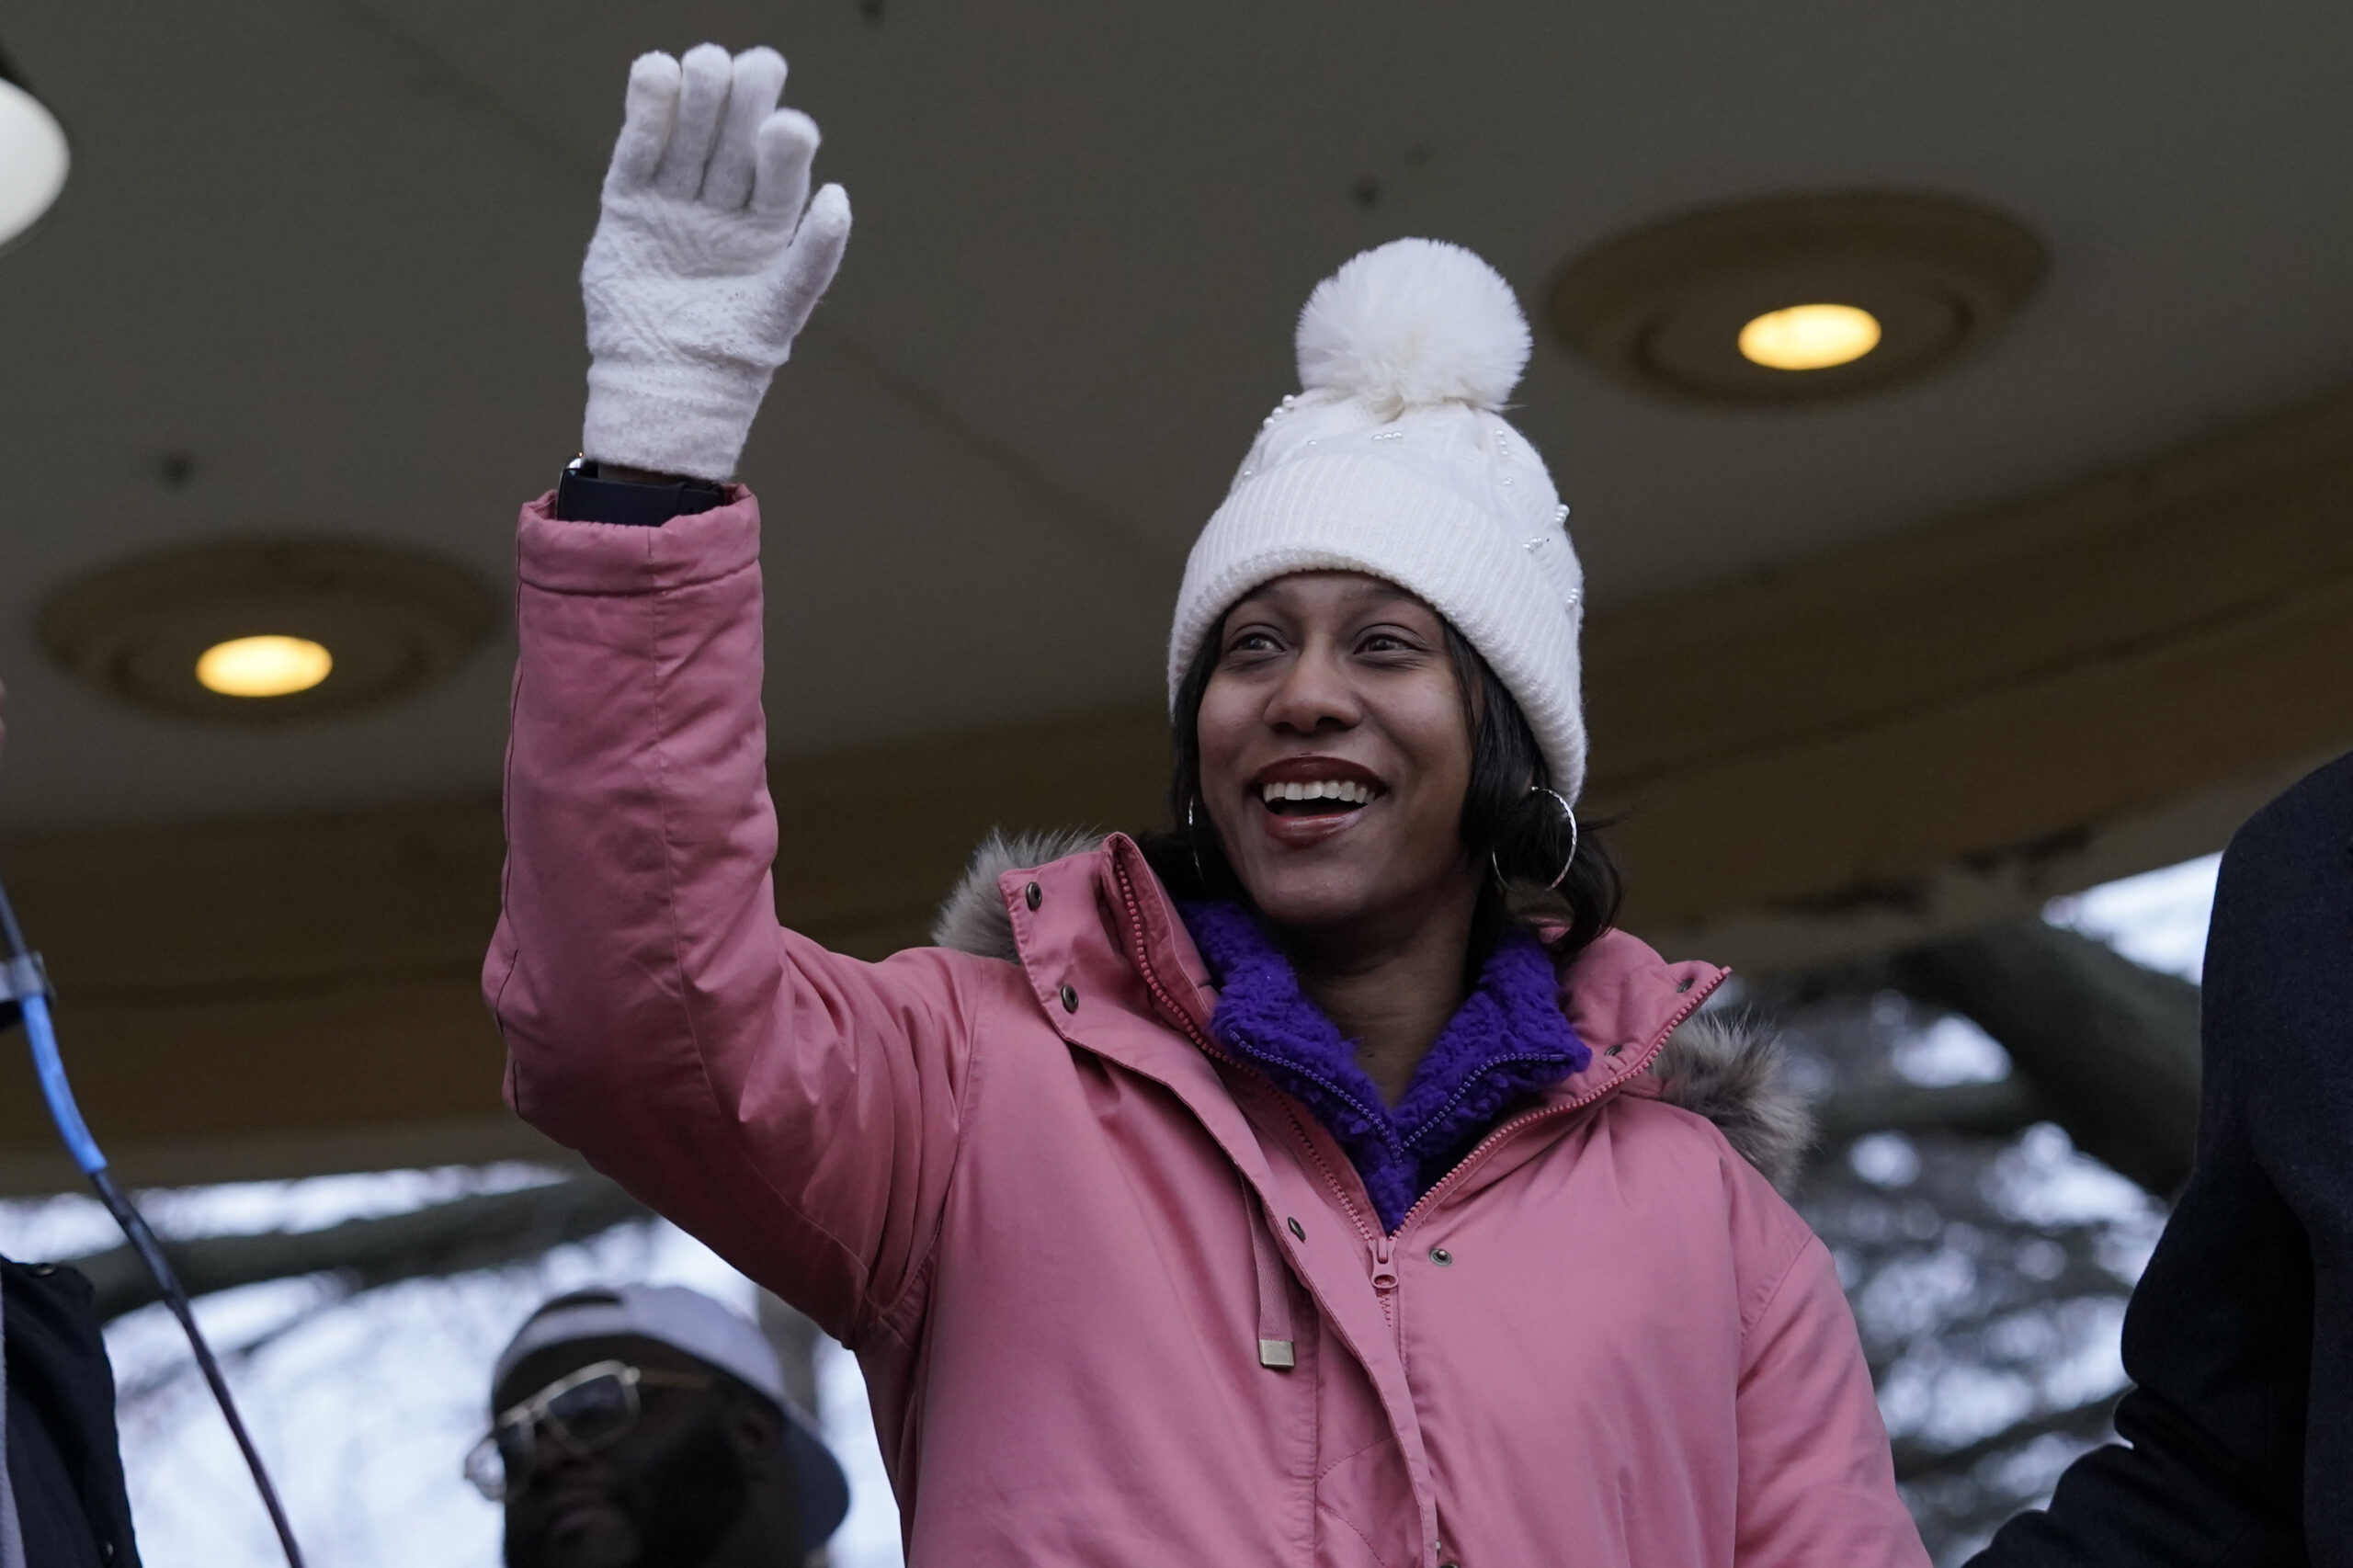 Brittany Watts waves to supporters at a rally on Thursday, Jan. 11, 2024, in Warren, Ohio. A grand jury decided Thursday that Watts, who was facing criminal charges for her handling of a home miscarriage, will not be charged. Photo credit: Sue Ogrocki, The Associated Press